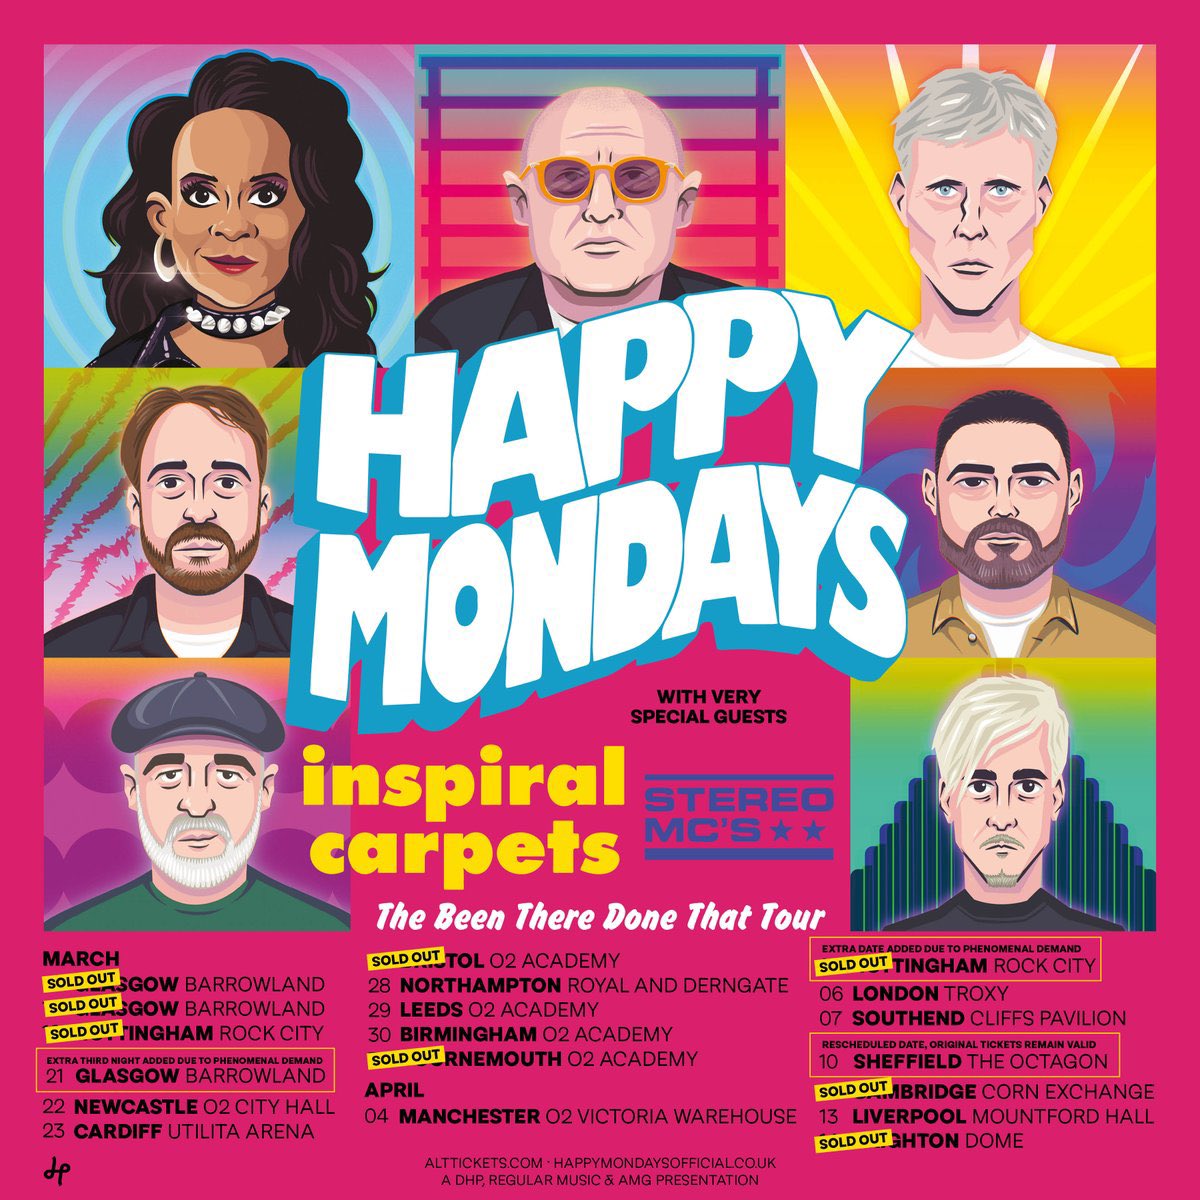 You wake up in the morning, you’ve got to read all the Sunday papers, the kids are running around, you’ve got to mow the lawn, wash the car, and you think “Sunday, Bloody Sunday!” Not today though @brightdome @Happy_Mondays @Rowetta @inspiralsband @StereoMcs_Rob_b